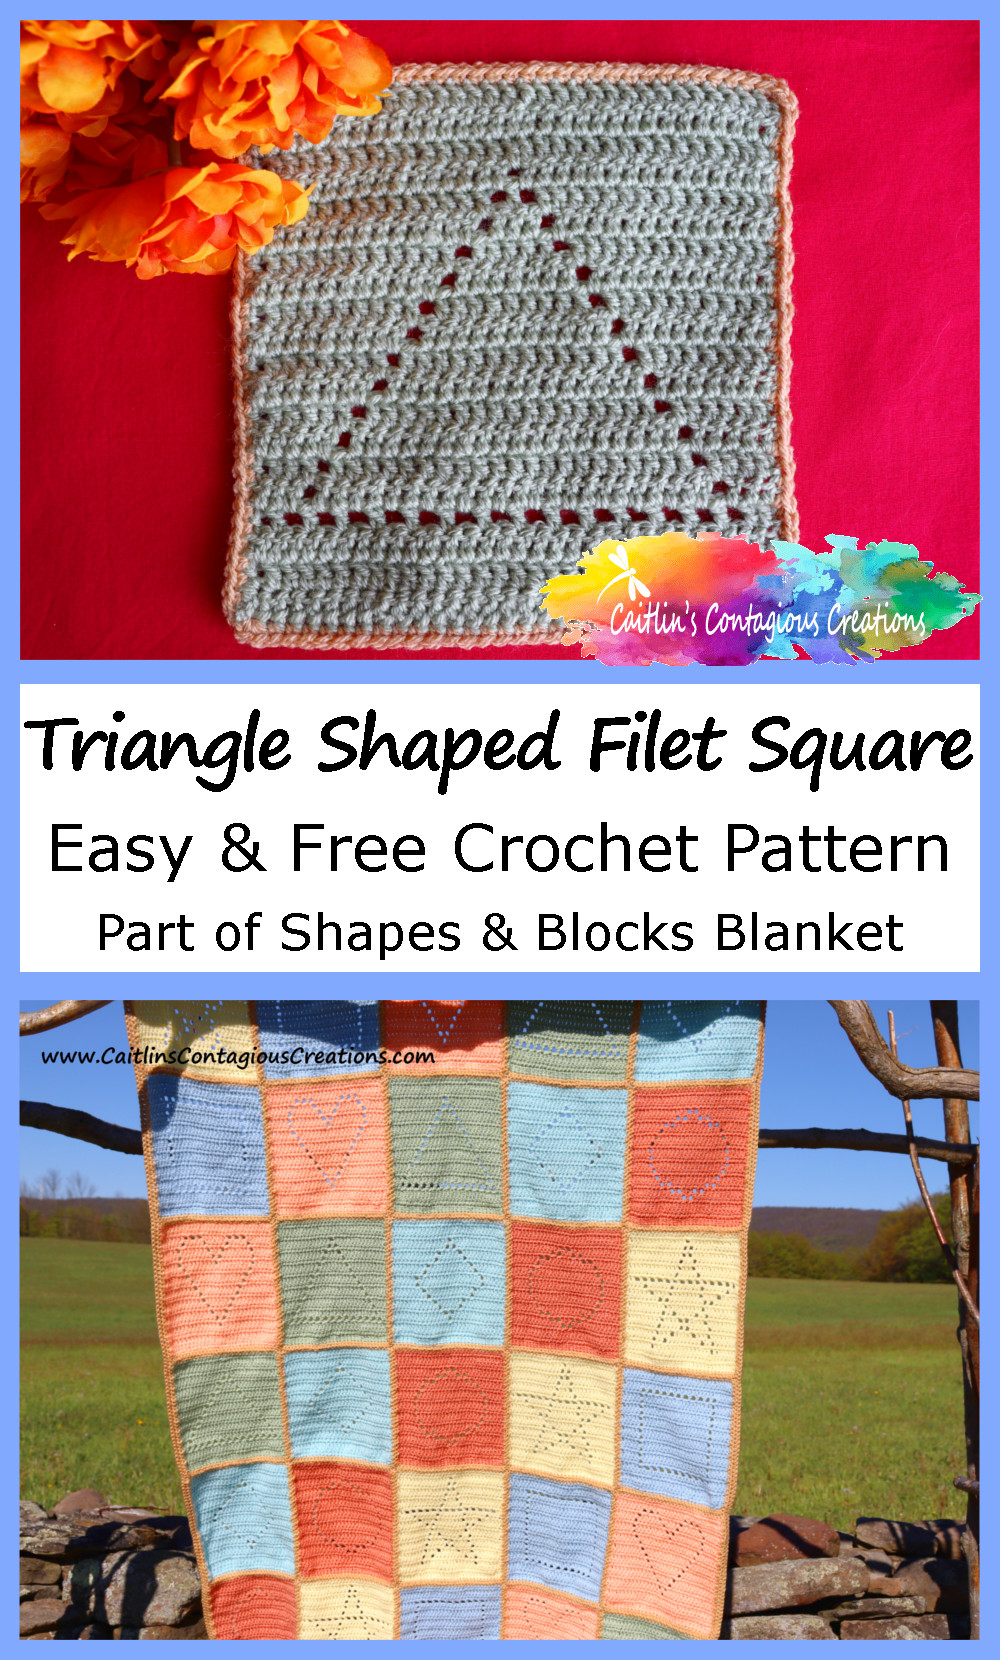 Triangle Shape Filet Square Crochet Pattern Free with written directions and stitch diagram.